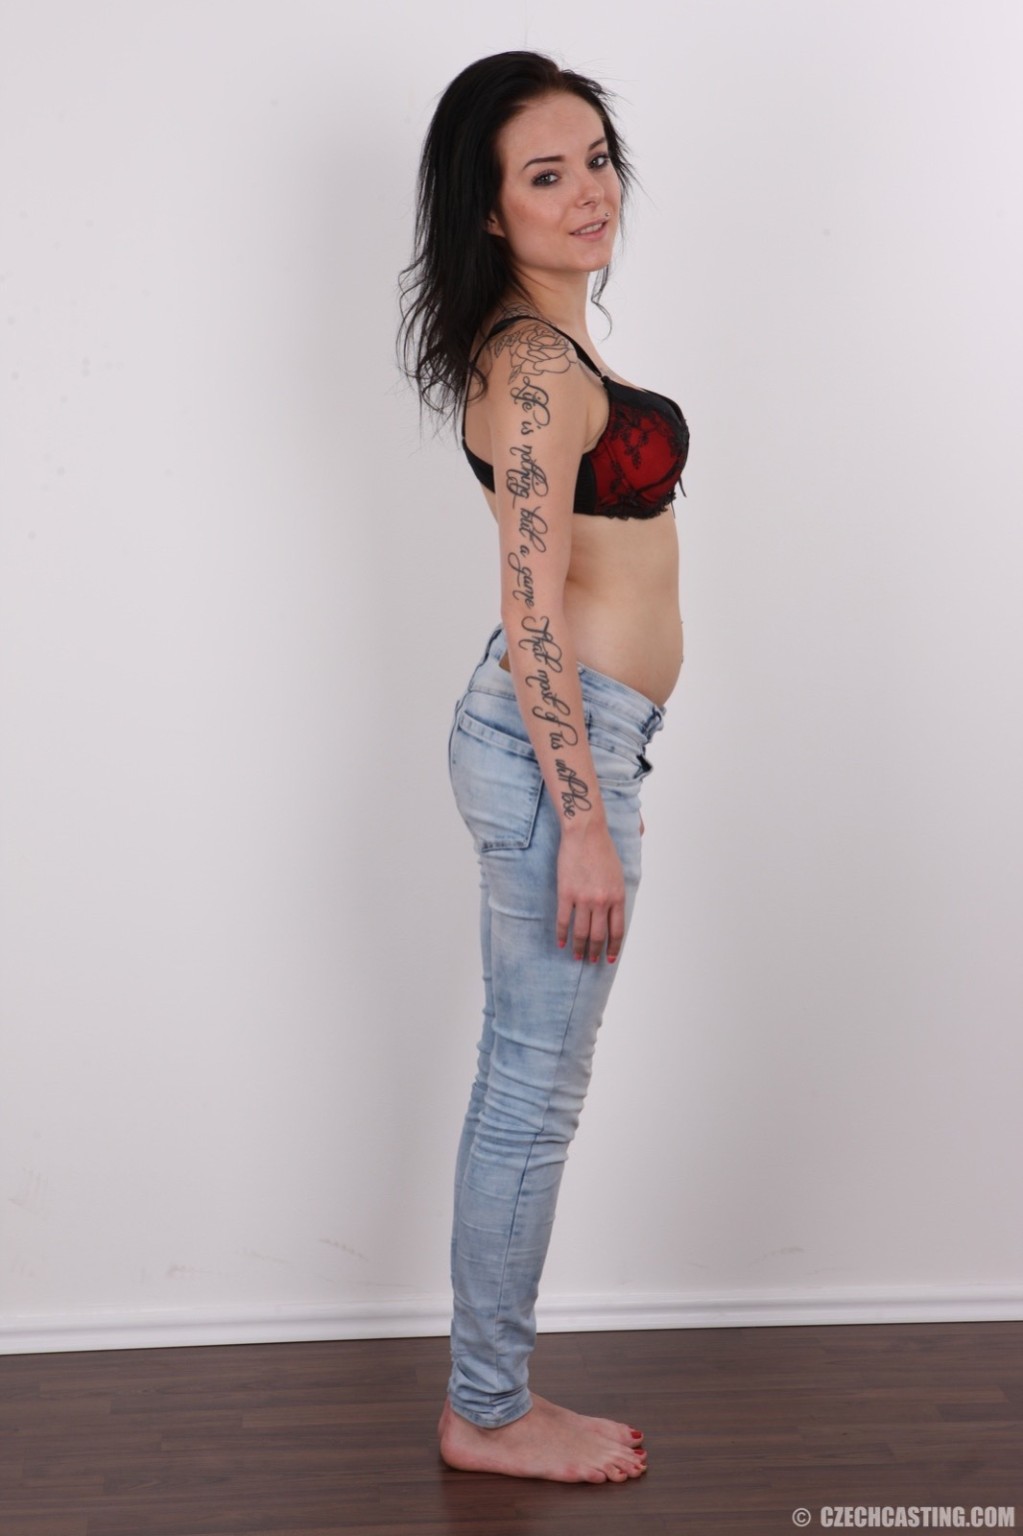 Tattooed brunette poses in casting session #67134089